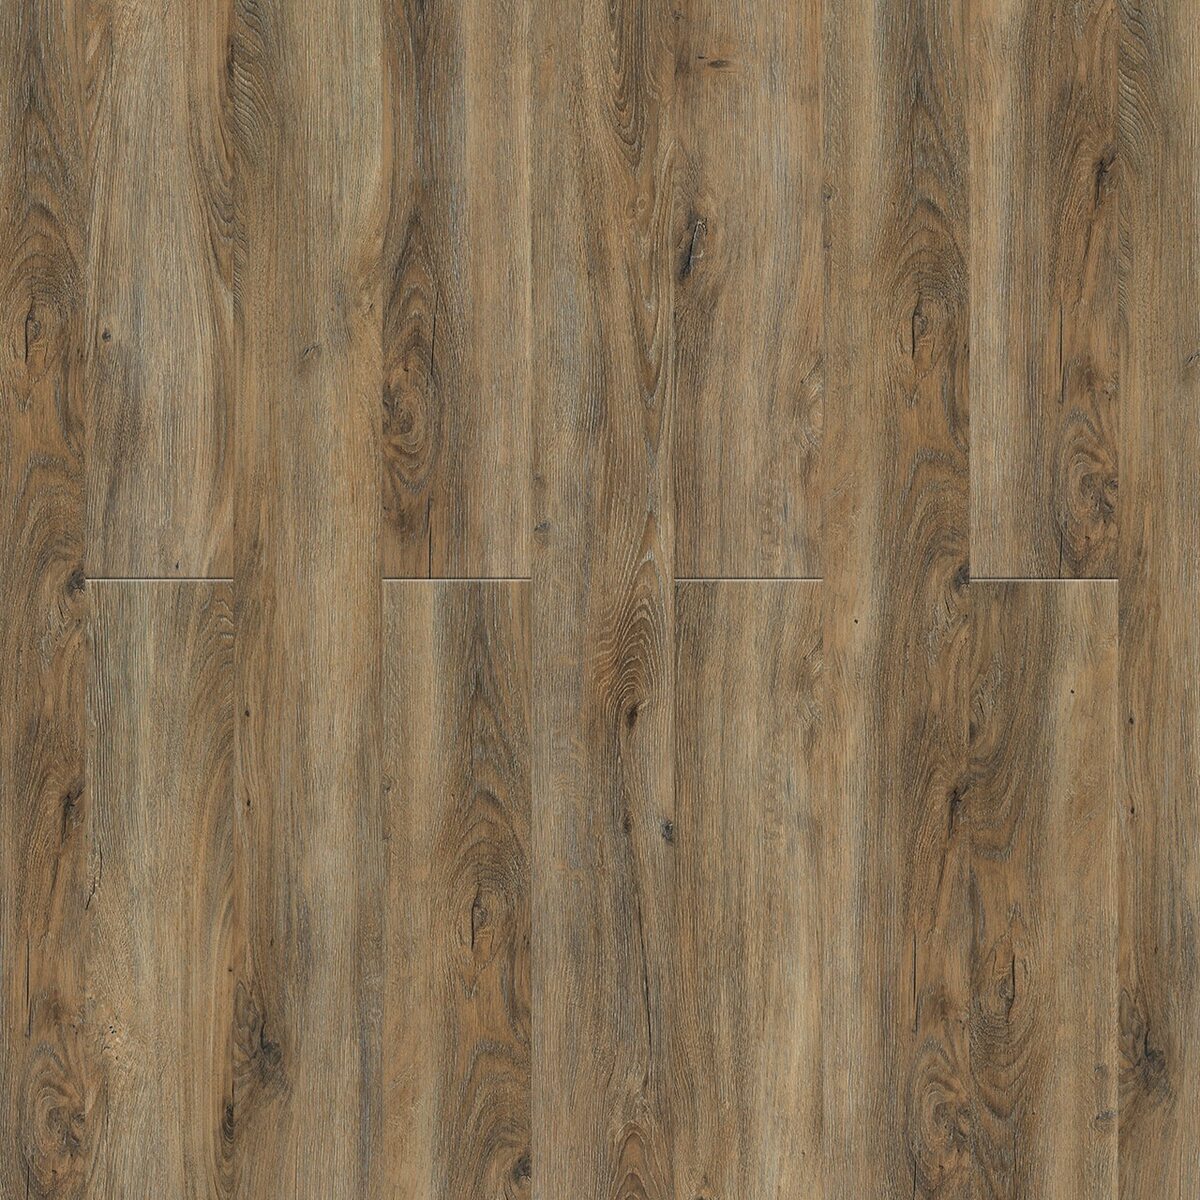 Engineered Floors - Cascade Collection - 7 in. x 48 in. - Bay of Plenty